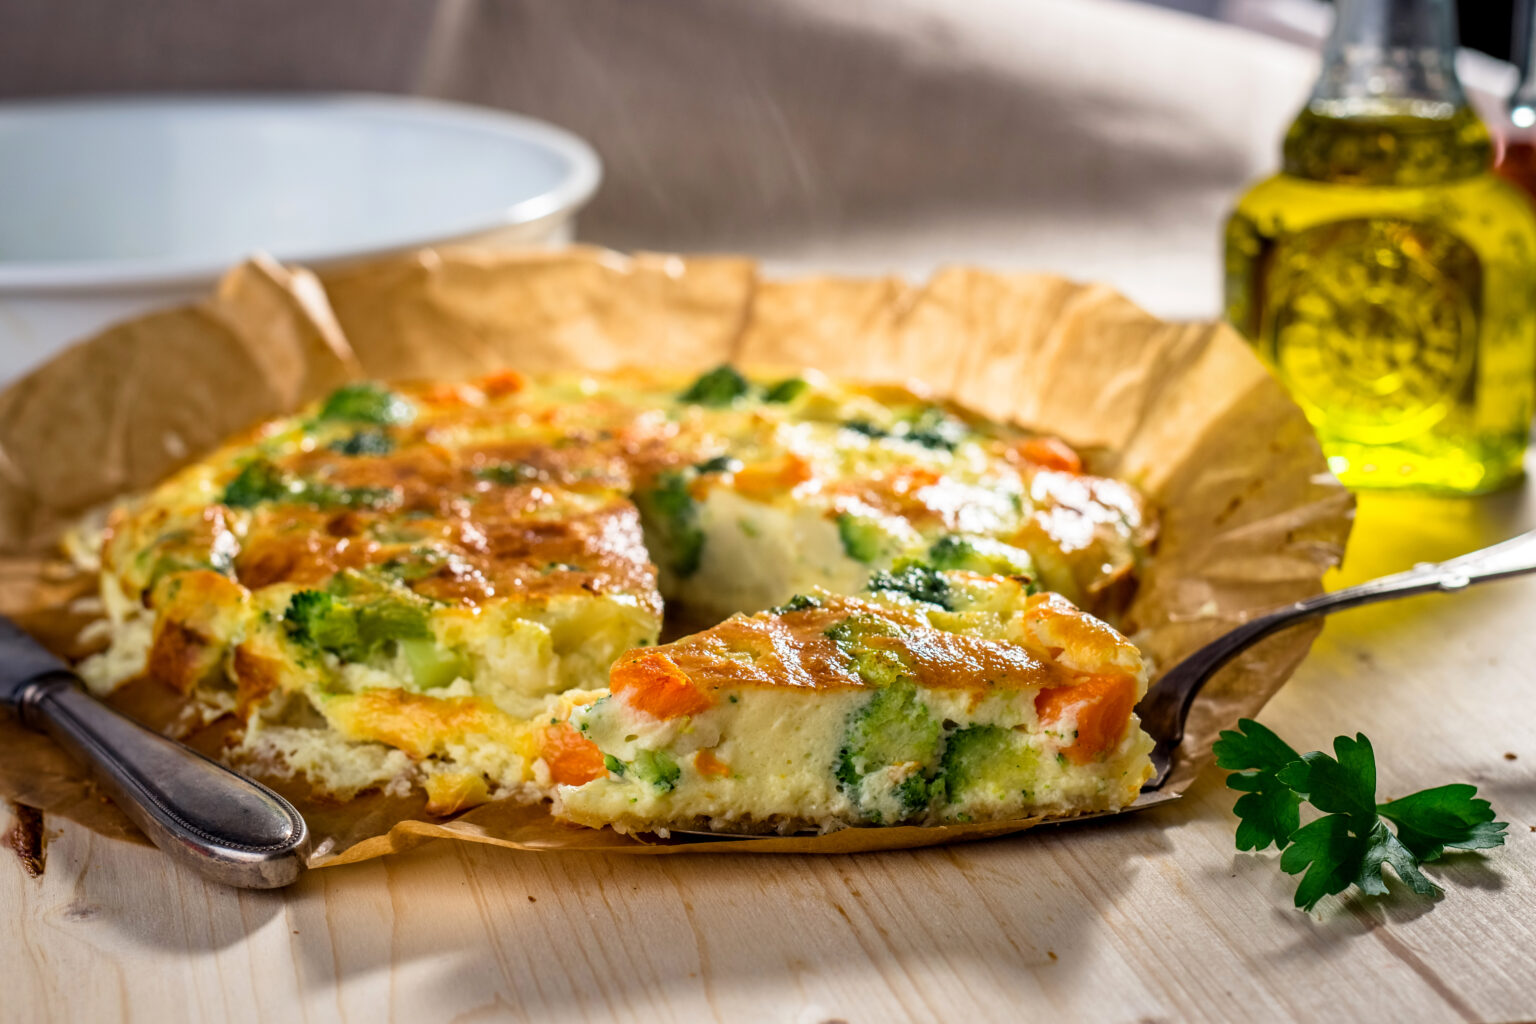 Homemade vegetable  quiche on wooden background